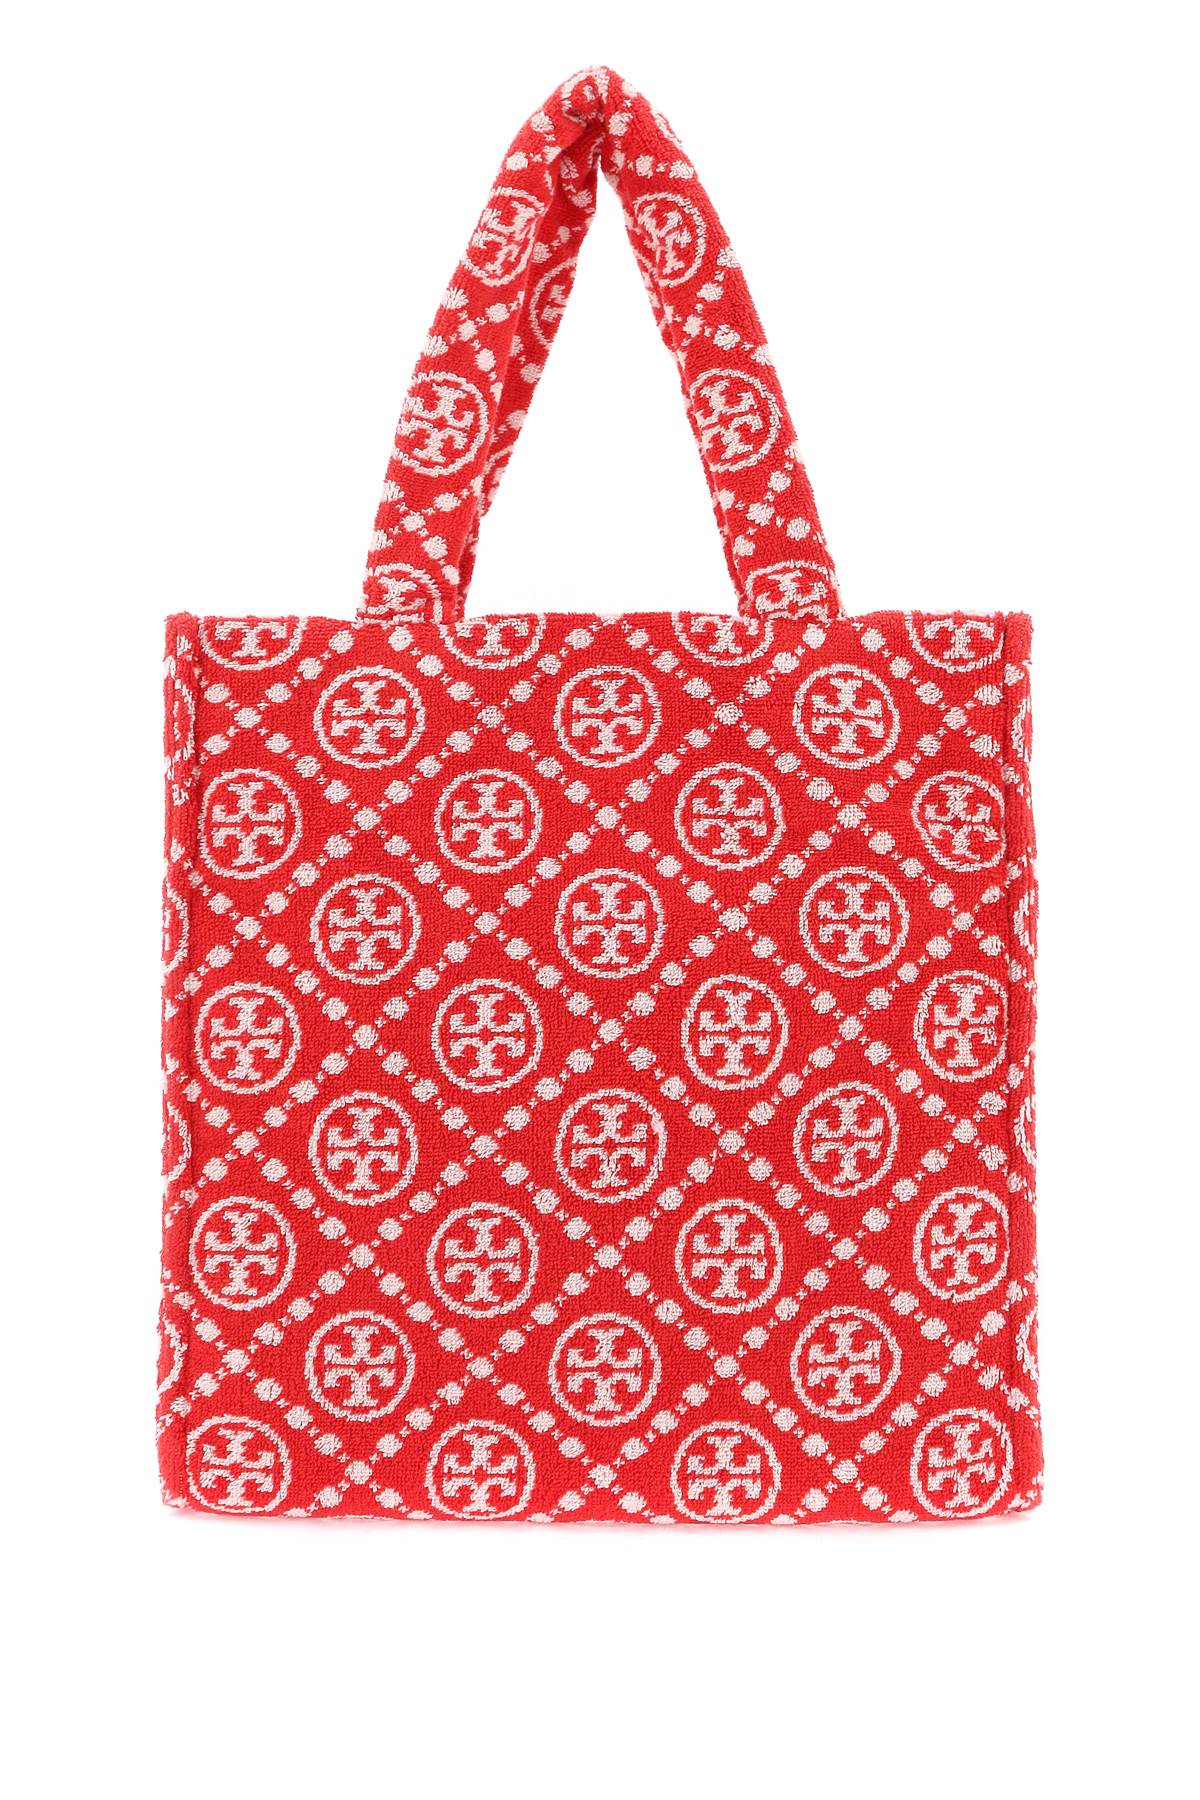 Tory burch t monogram terry tote bag 148687 STRAWBERRY